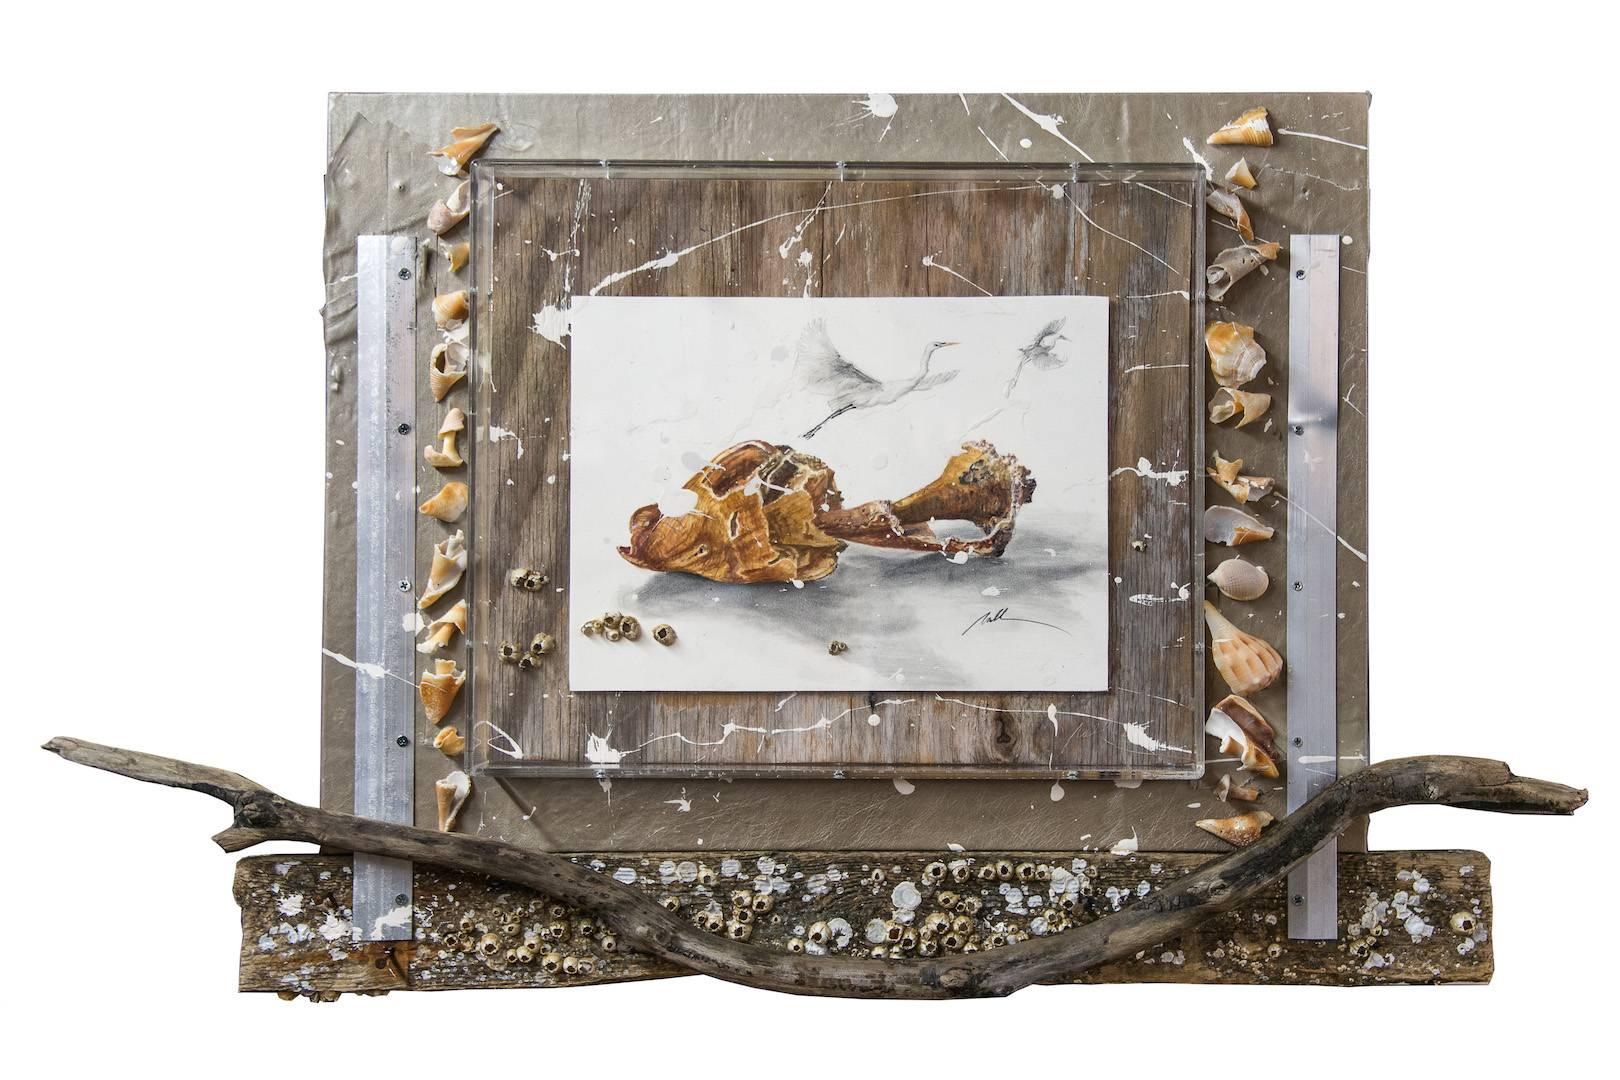 Egrets and Conche Shell - Mixed Media Art by Nall